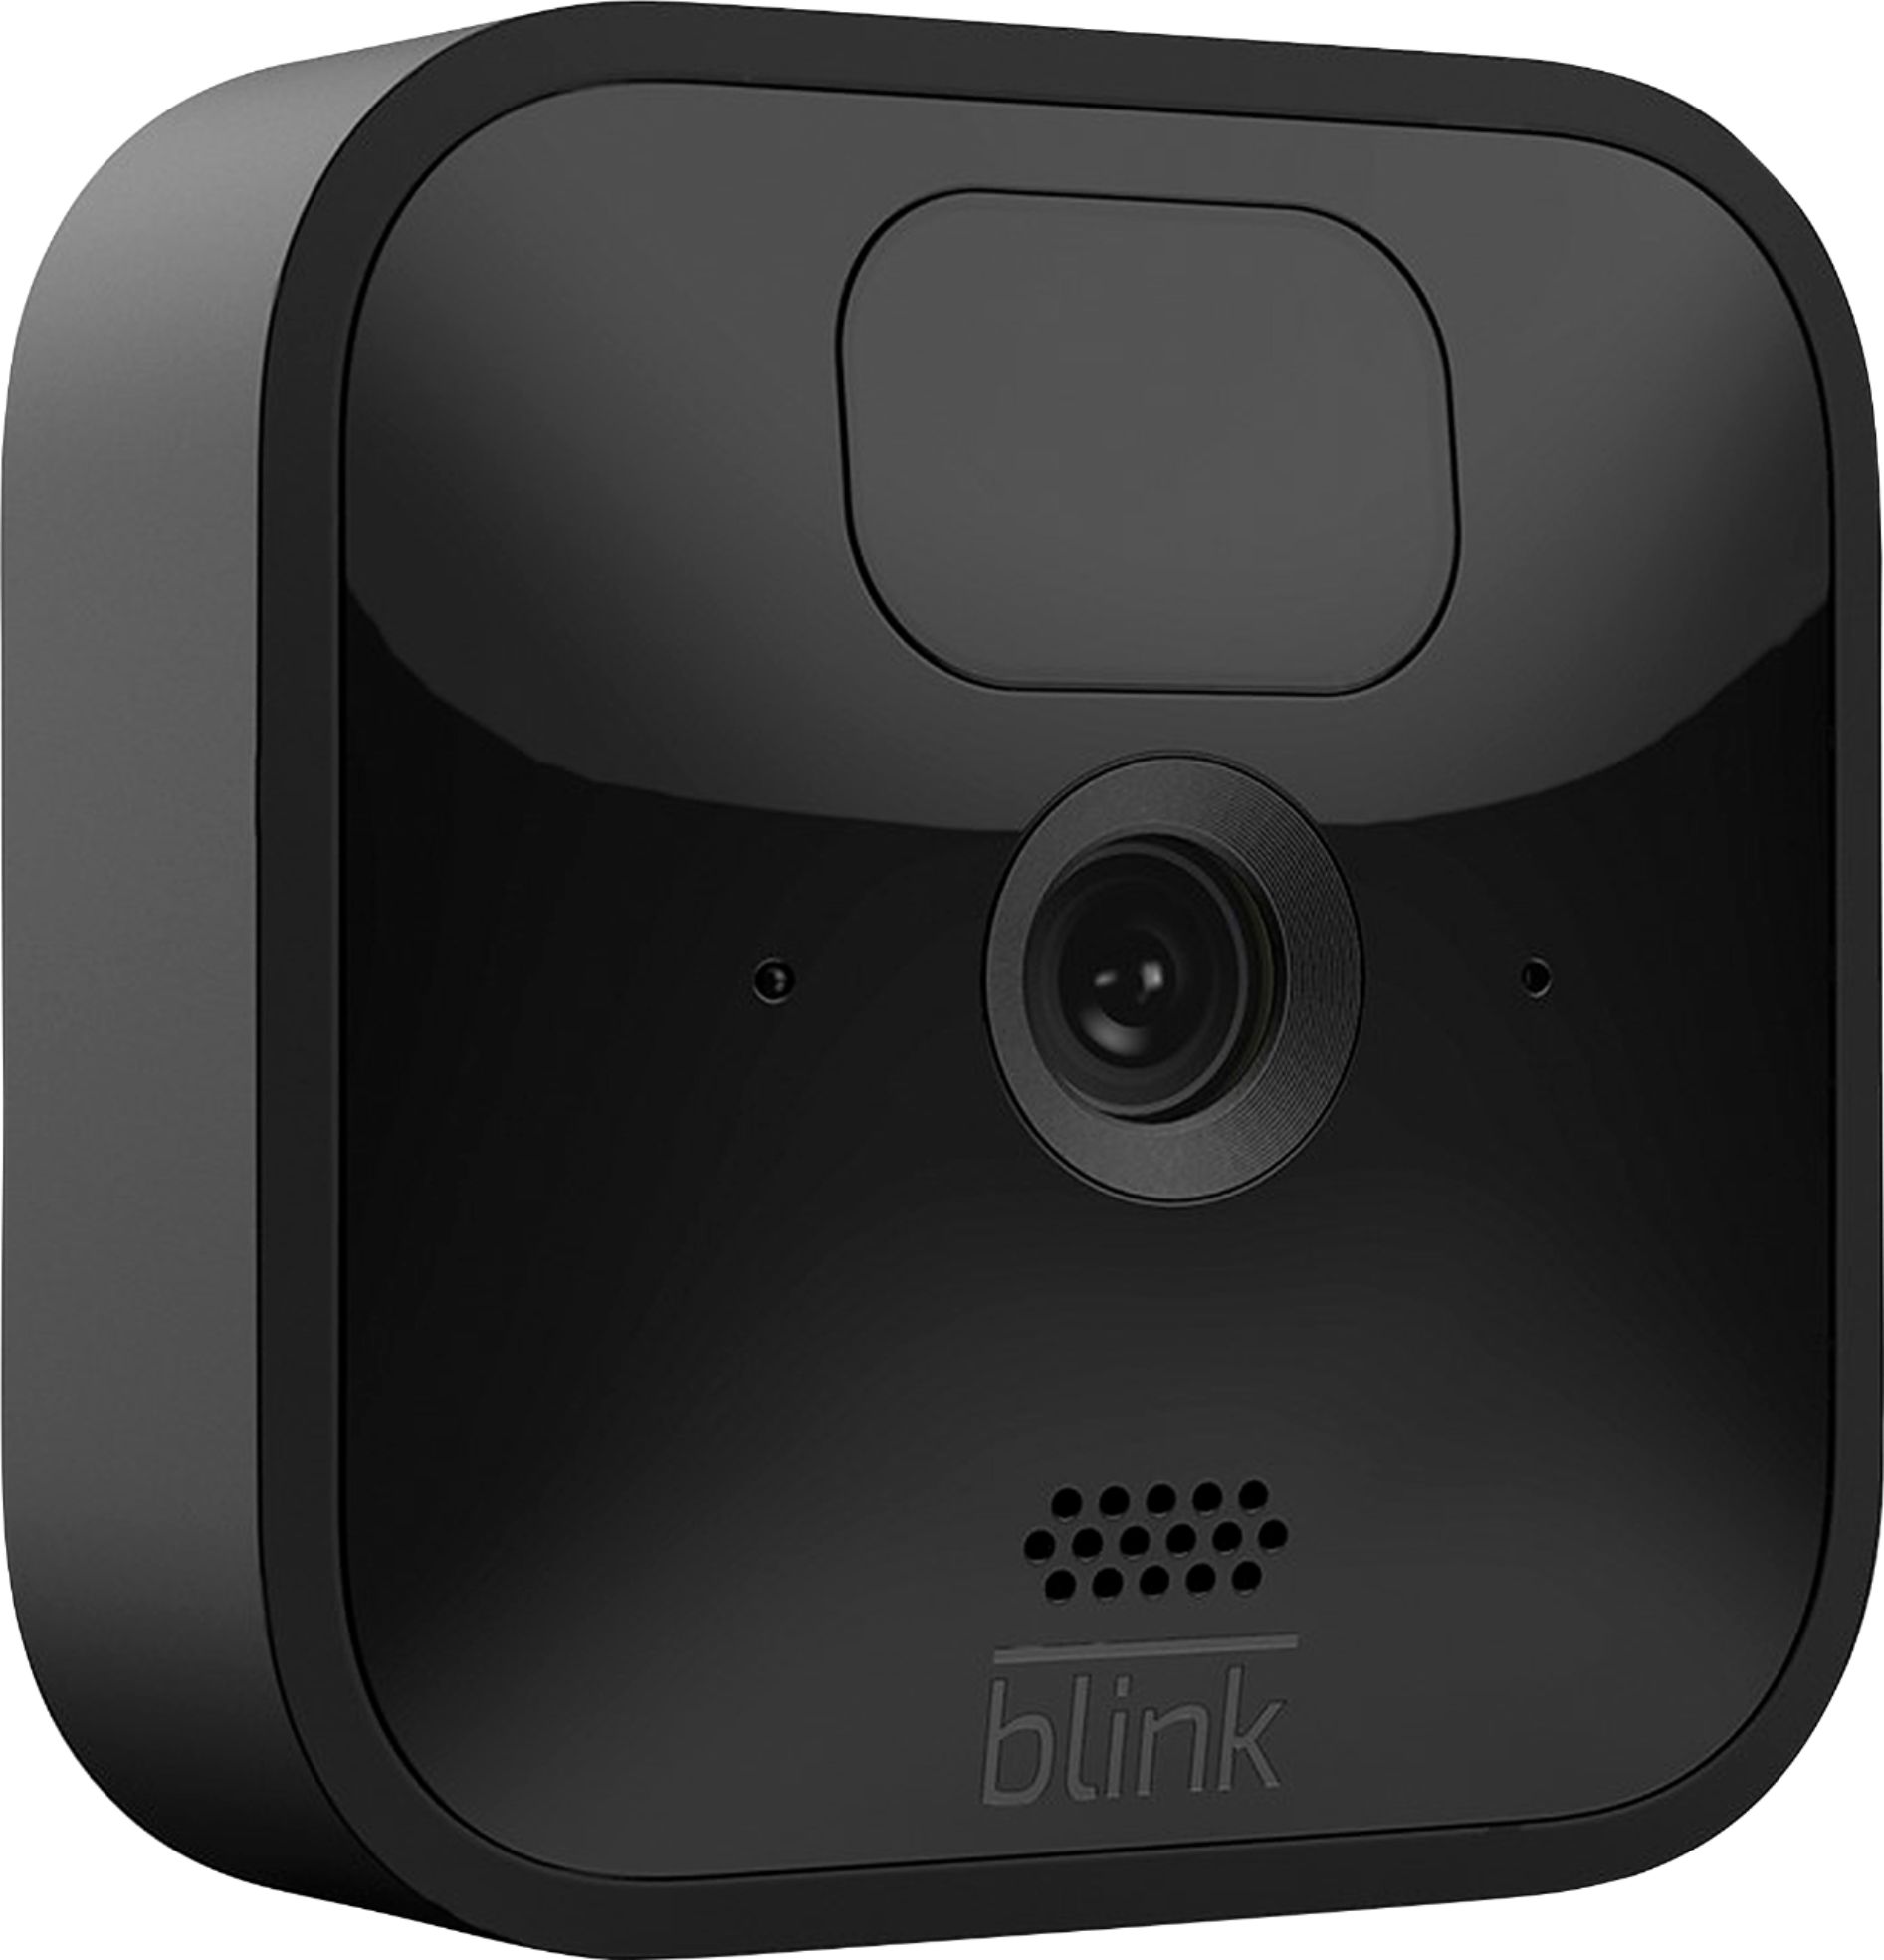 Review: Blink Outdoor Home Security Camera